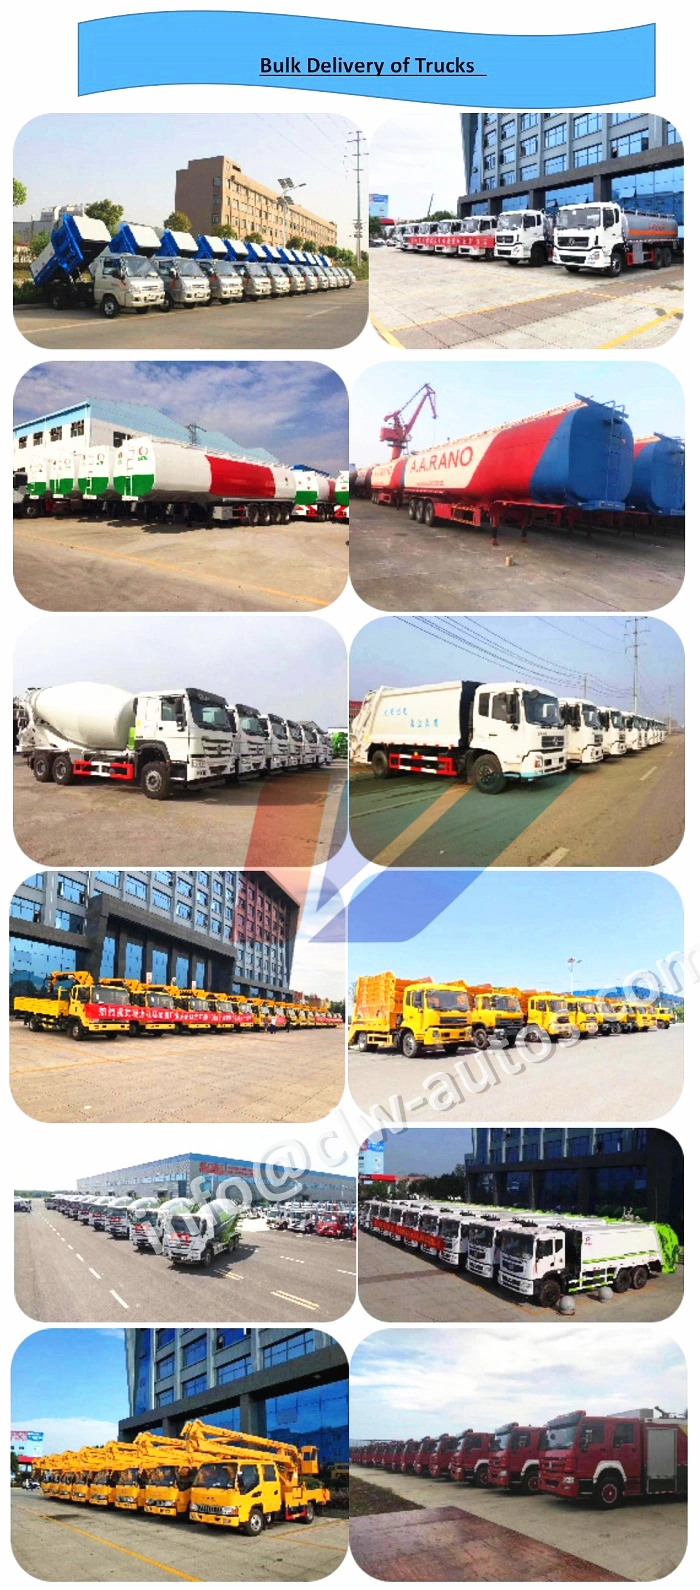 20m3 20ton FAW J5 Diesel Refilling Tank Truck for Mining Construction Equipment Refilling with Dispenser Counters